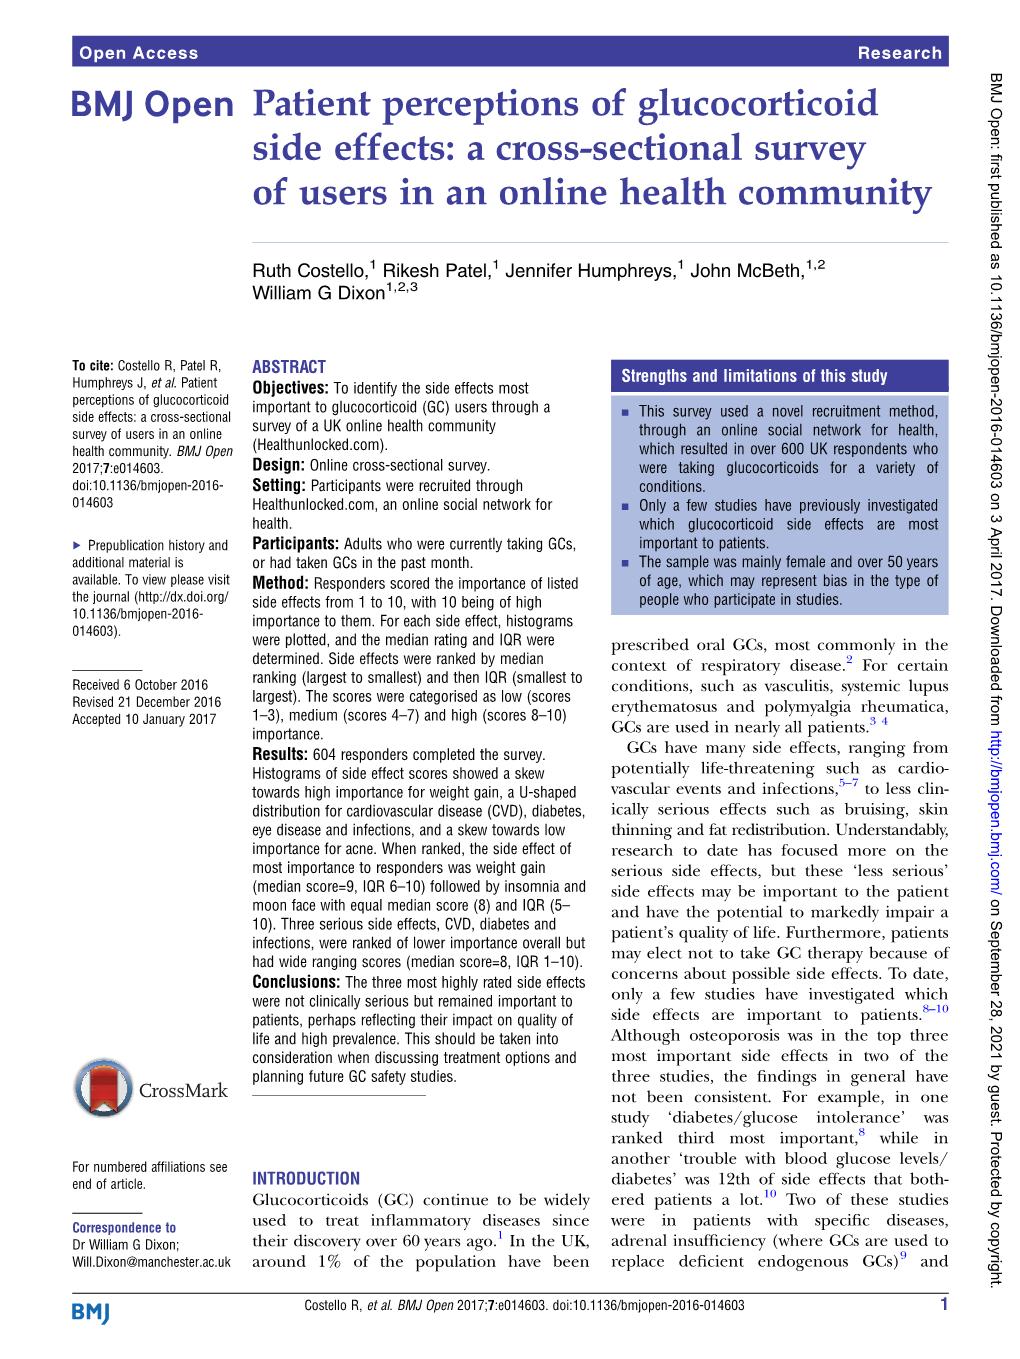 A Cross-Sectional Survey of Users in an Online Health Community